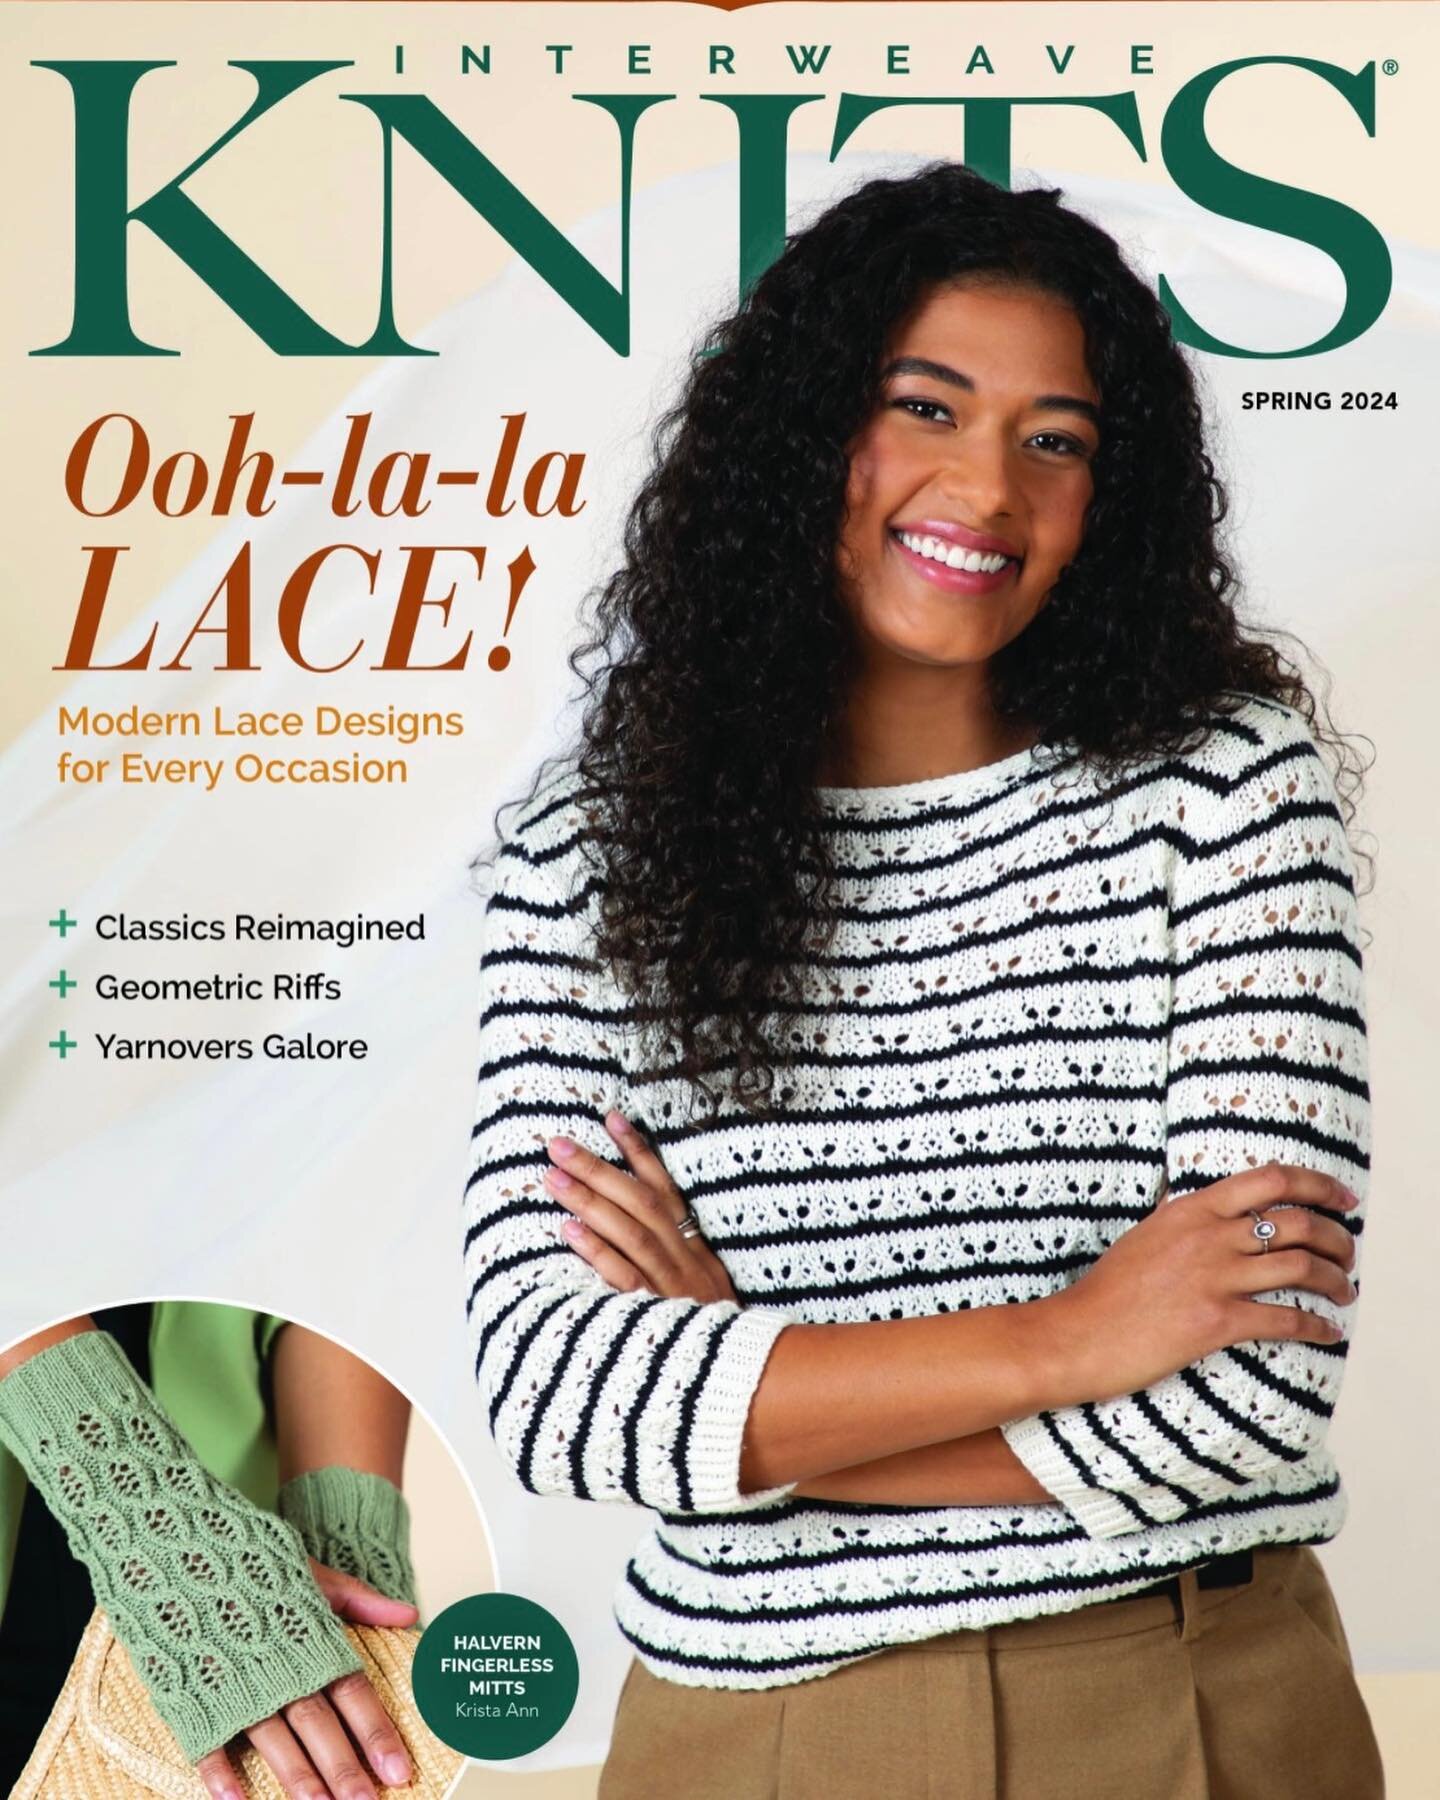 Spring 2024 issue of Interweave Knits is now available in stores and as an online digital download! My Halvern Fingerless Mitts design using @knittingforolive Cotton Merino grace the cover!

This was a really fun project to design and knit. It&rsquo;